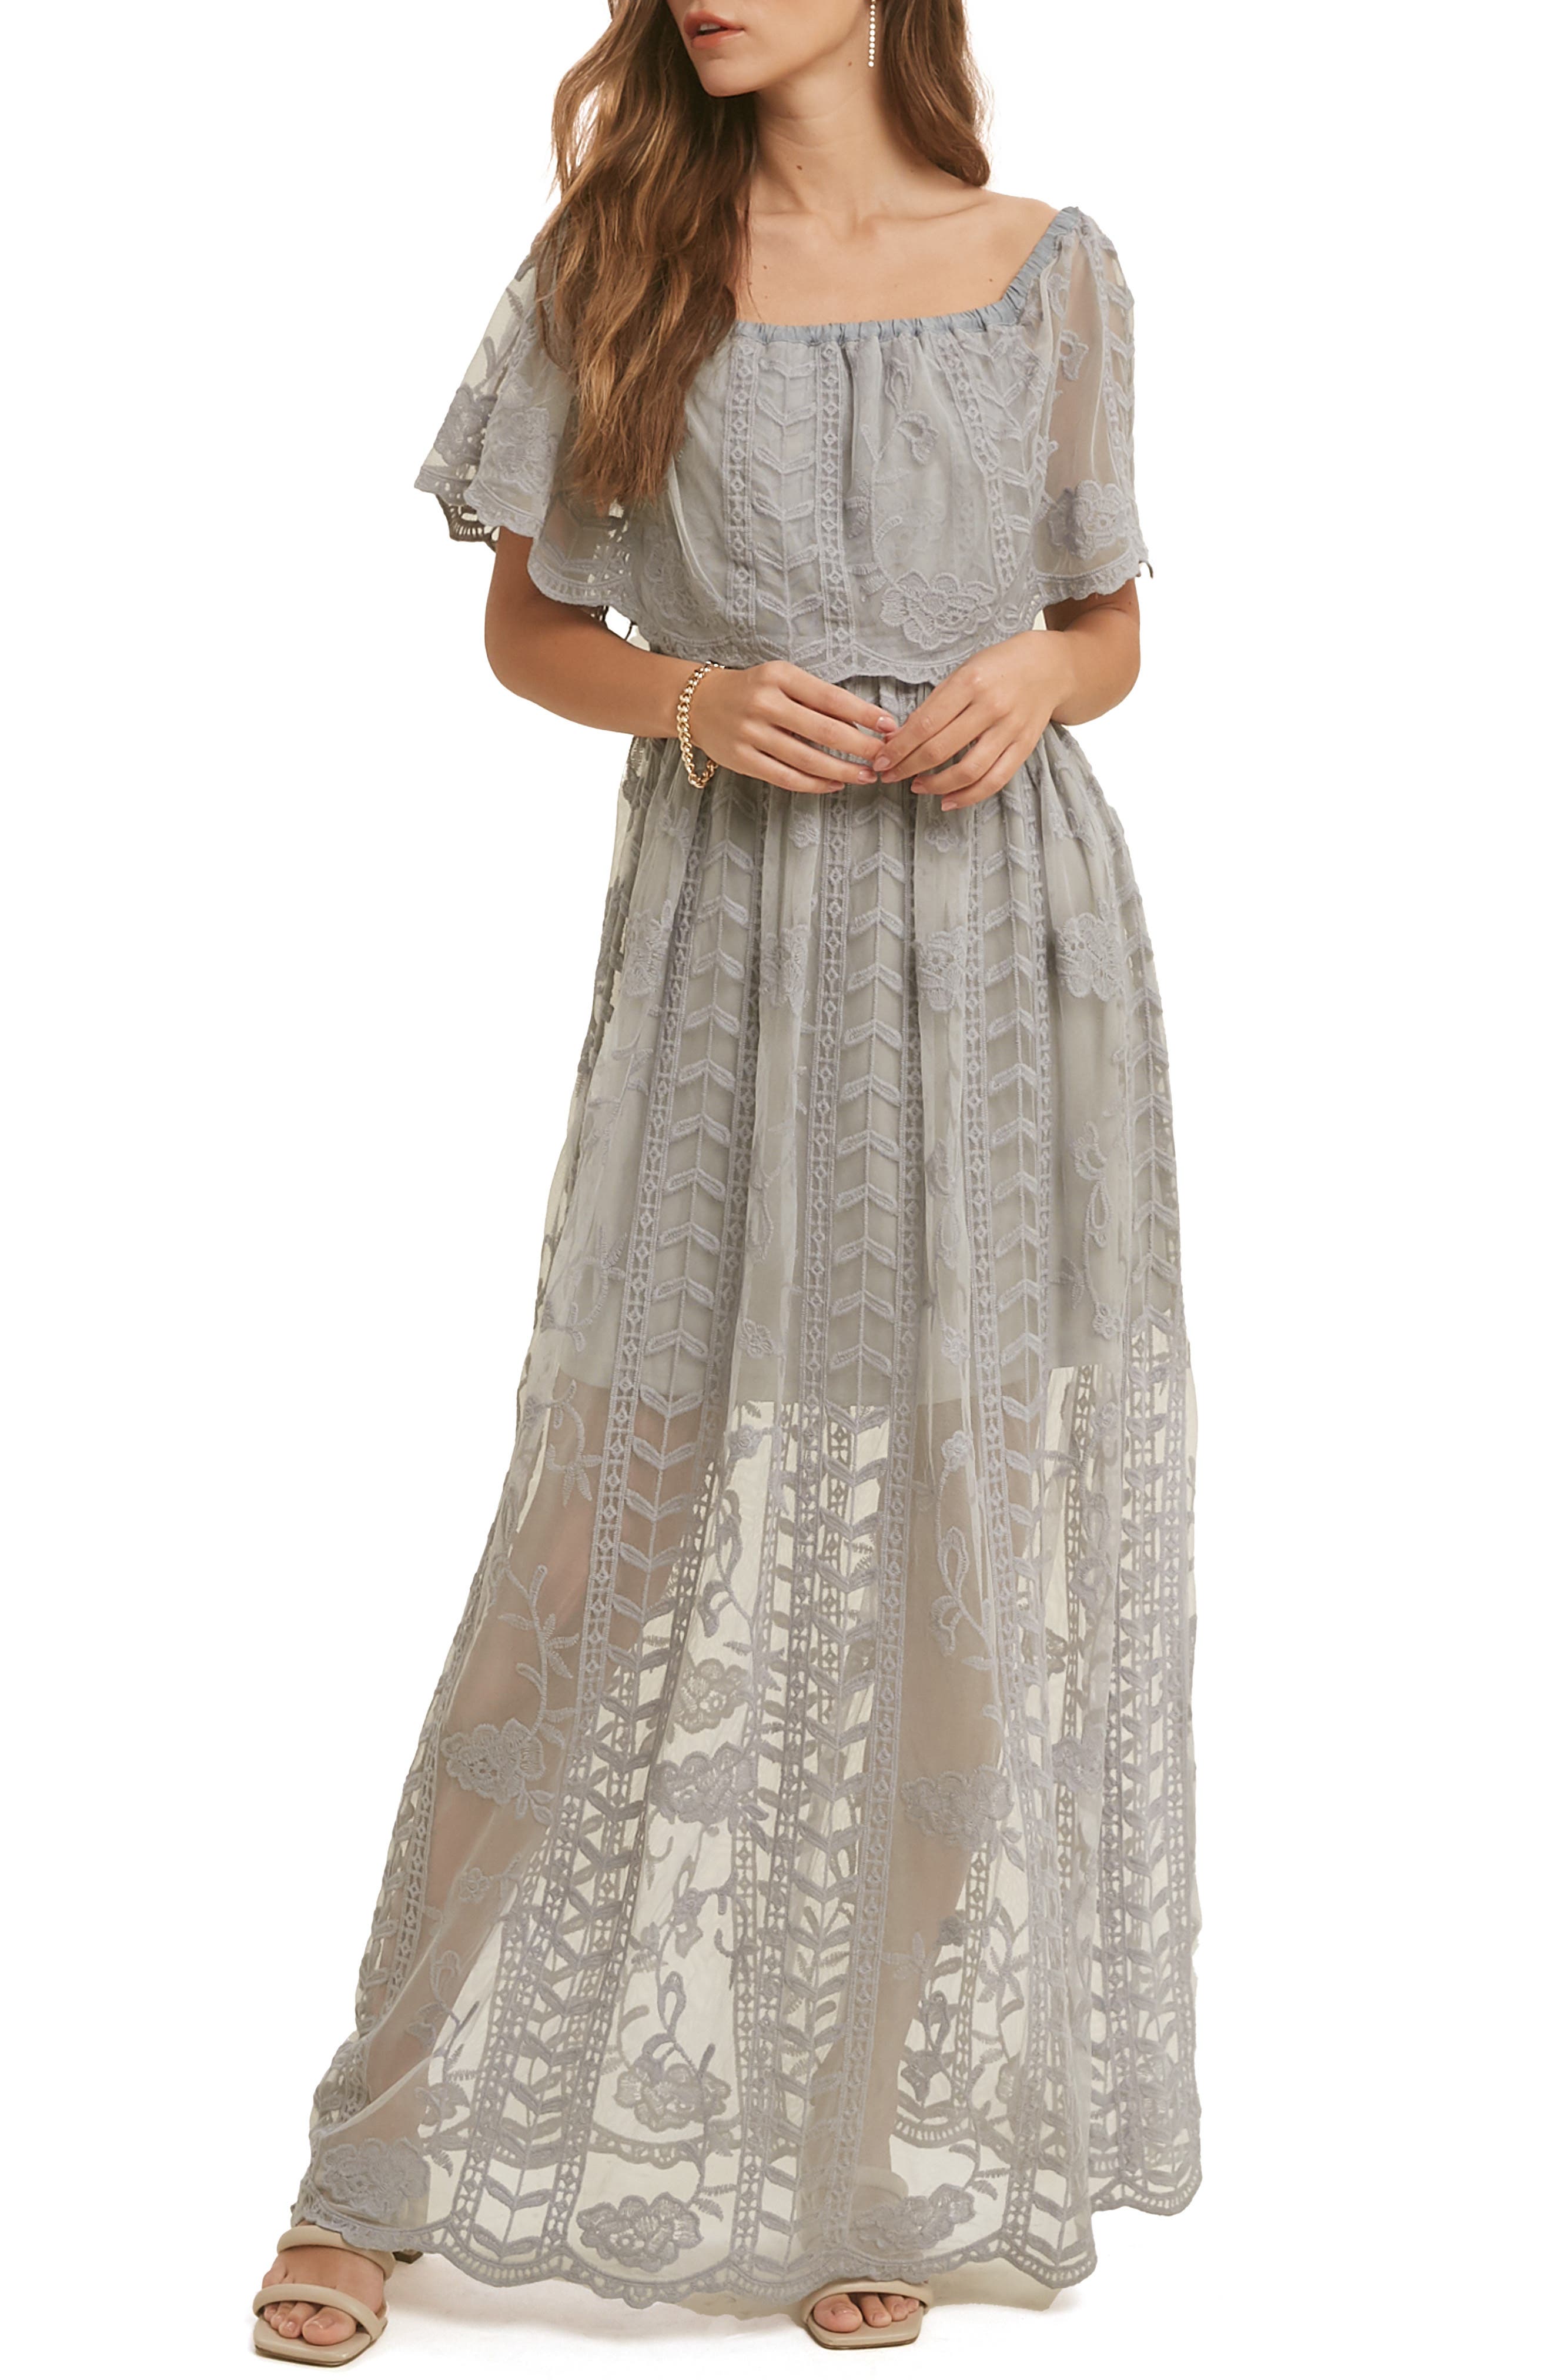 Lace Overlay Off-the-Shoulder Maxi Dress Wishlist